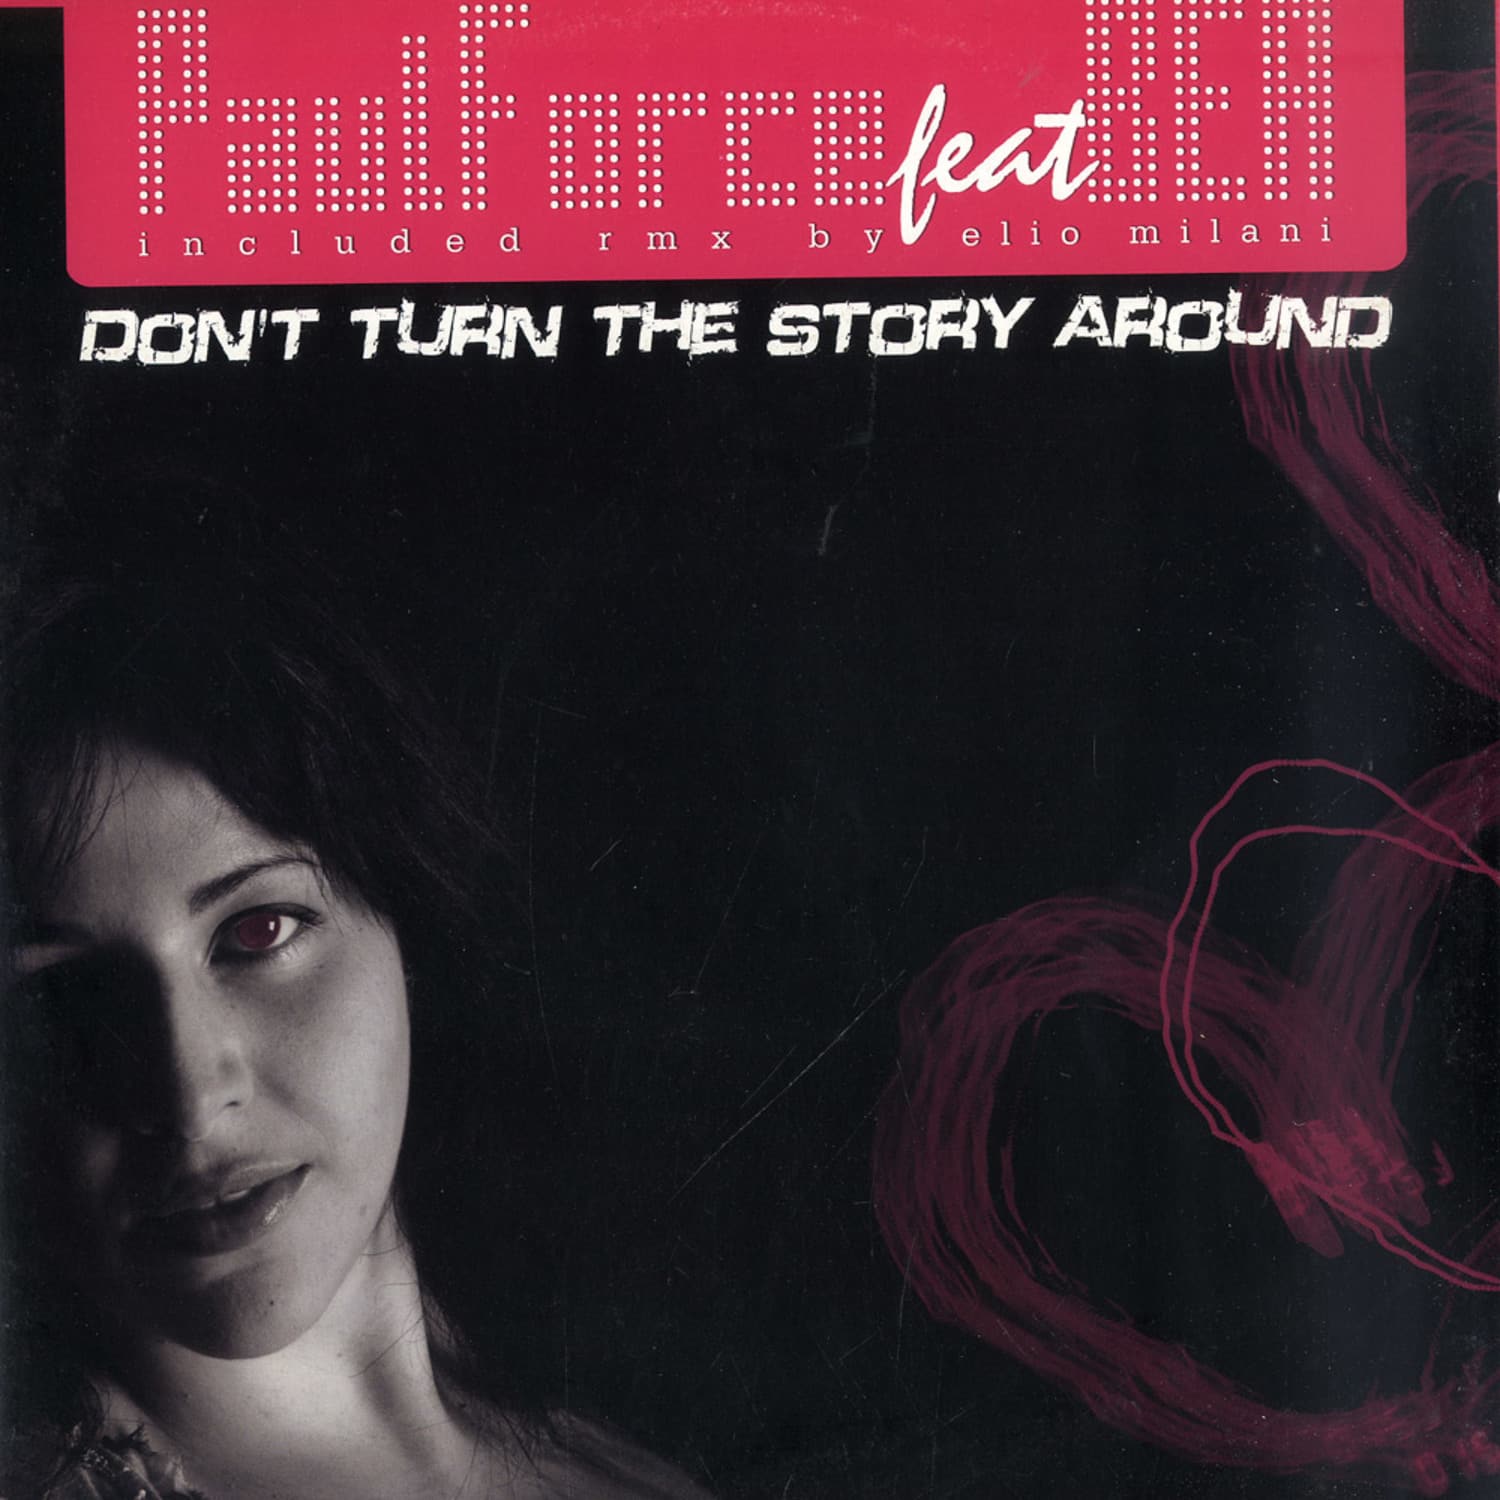 Paul Force feat Bea - DONT TURN THE STORY AROUND